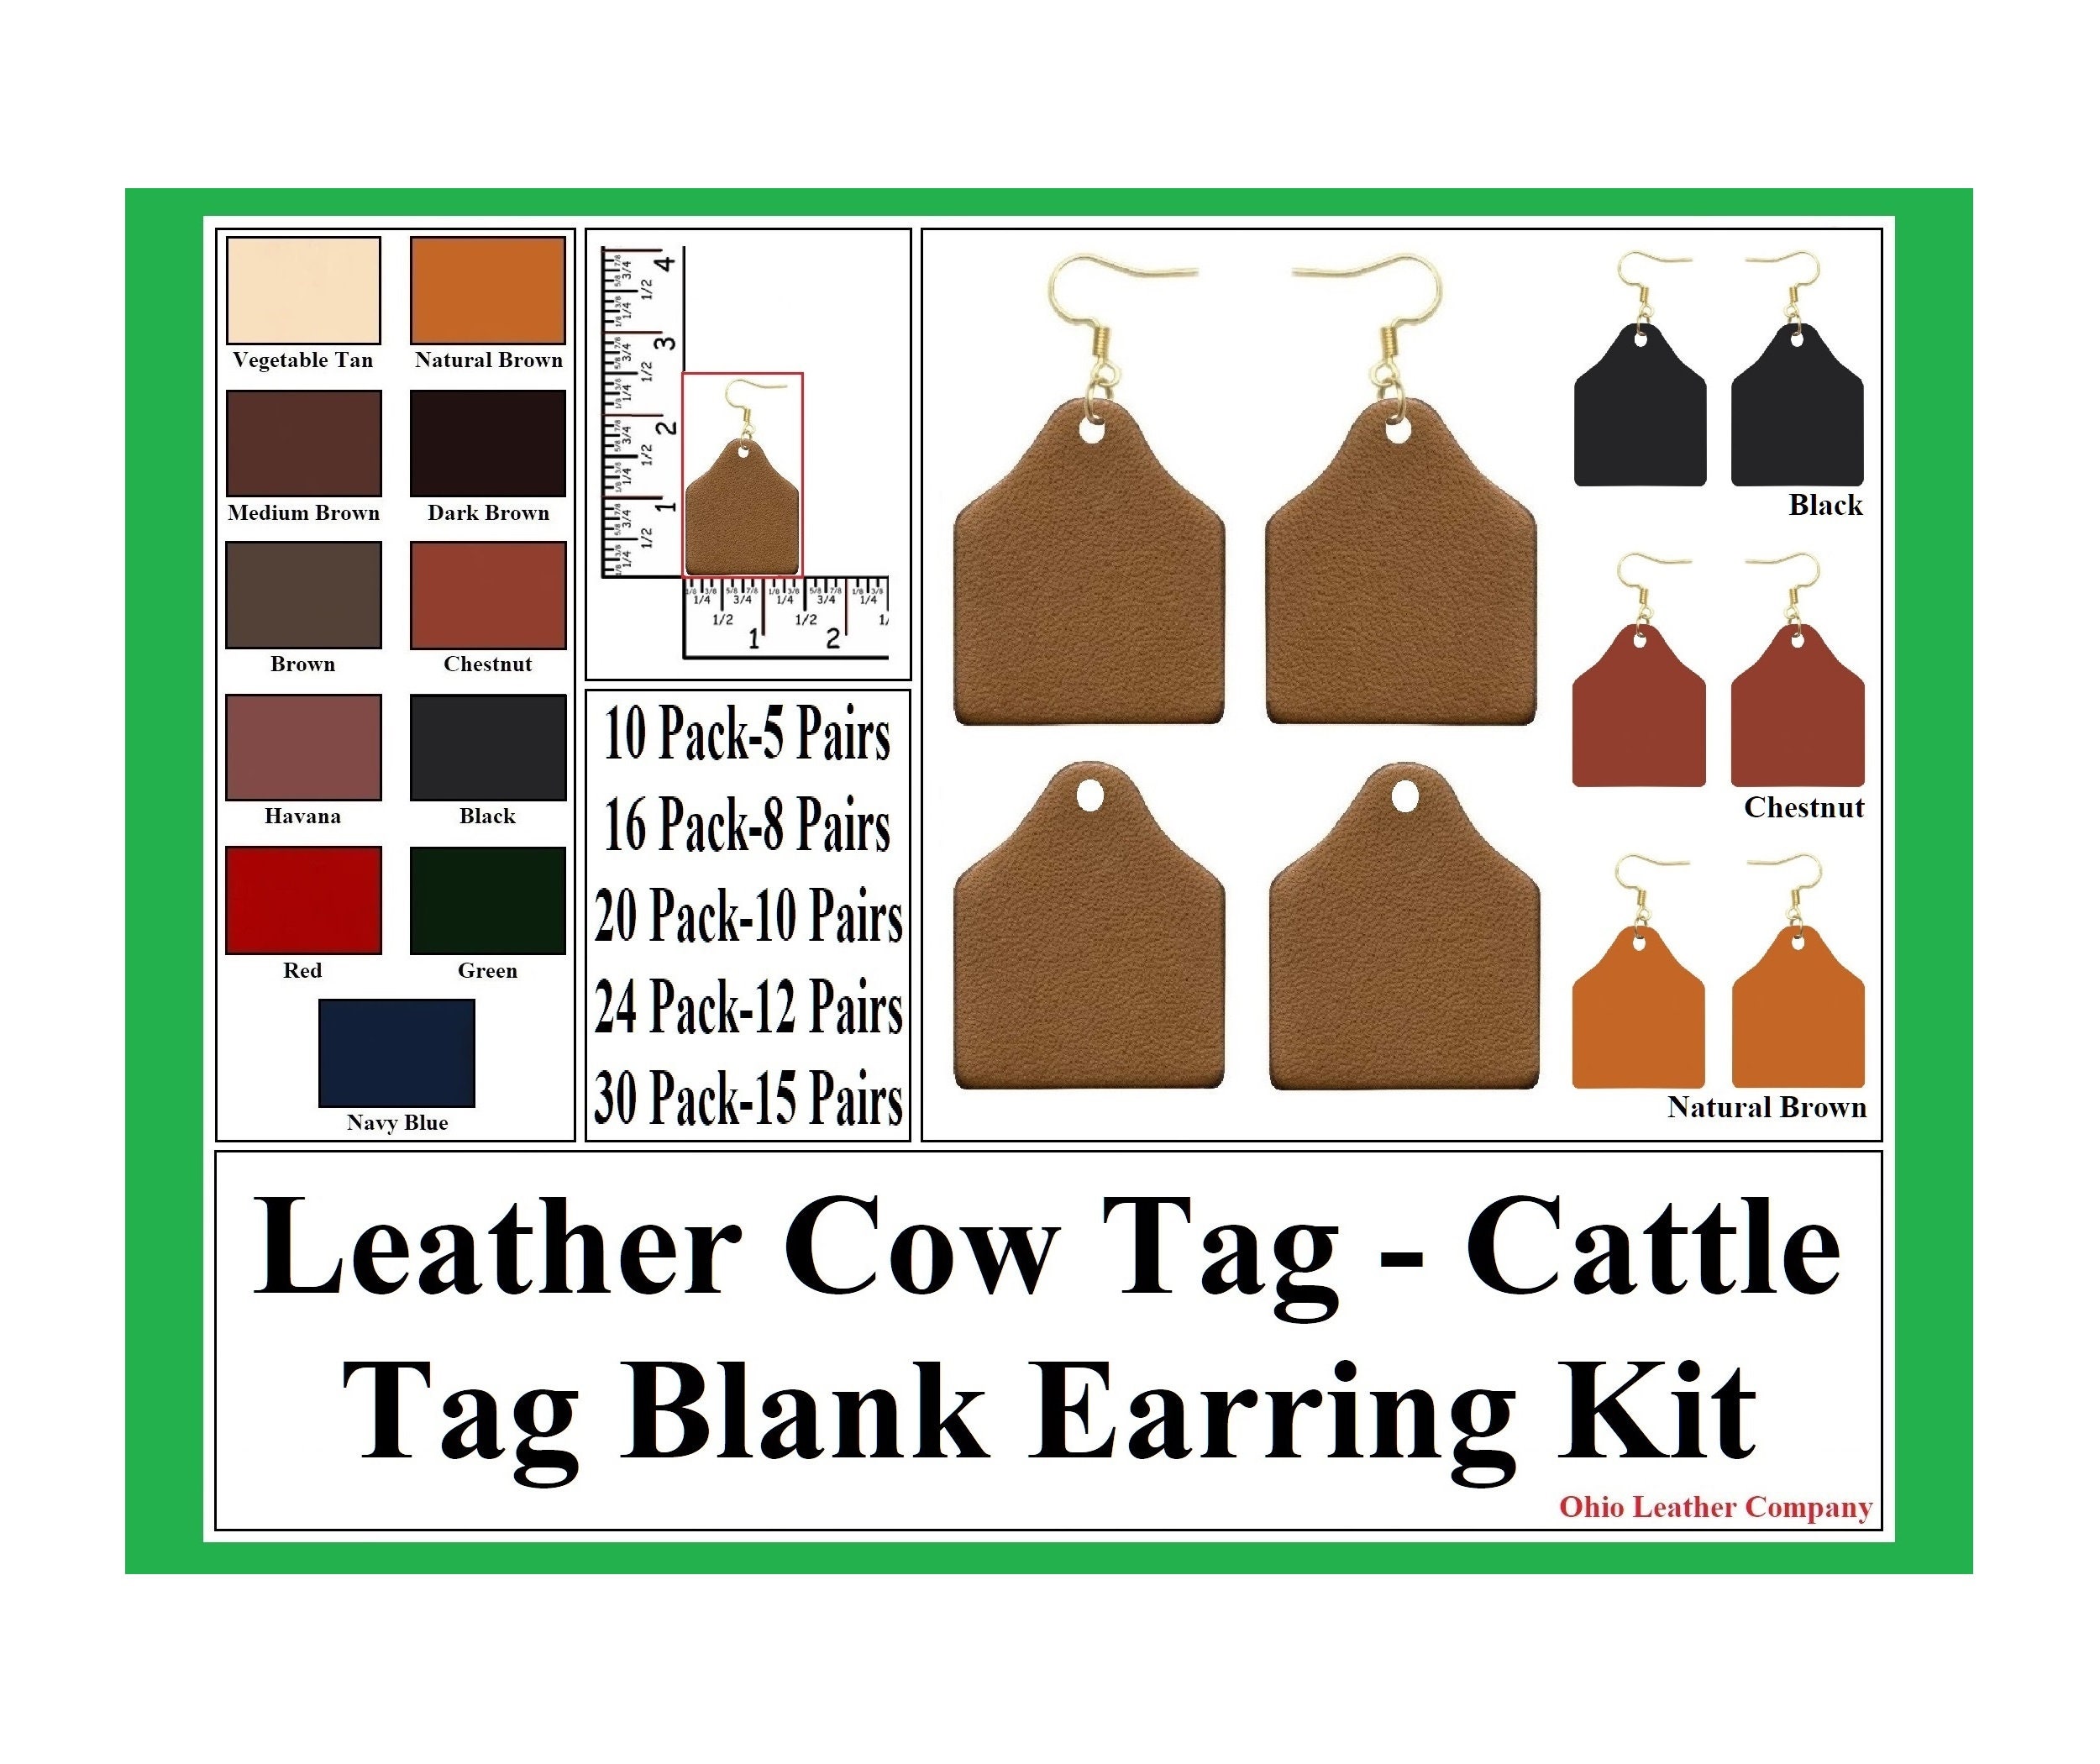 6 Pack: Faux Leather Earring Making Kit by Bead Landing™